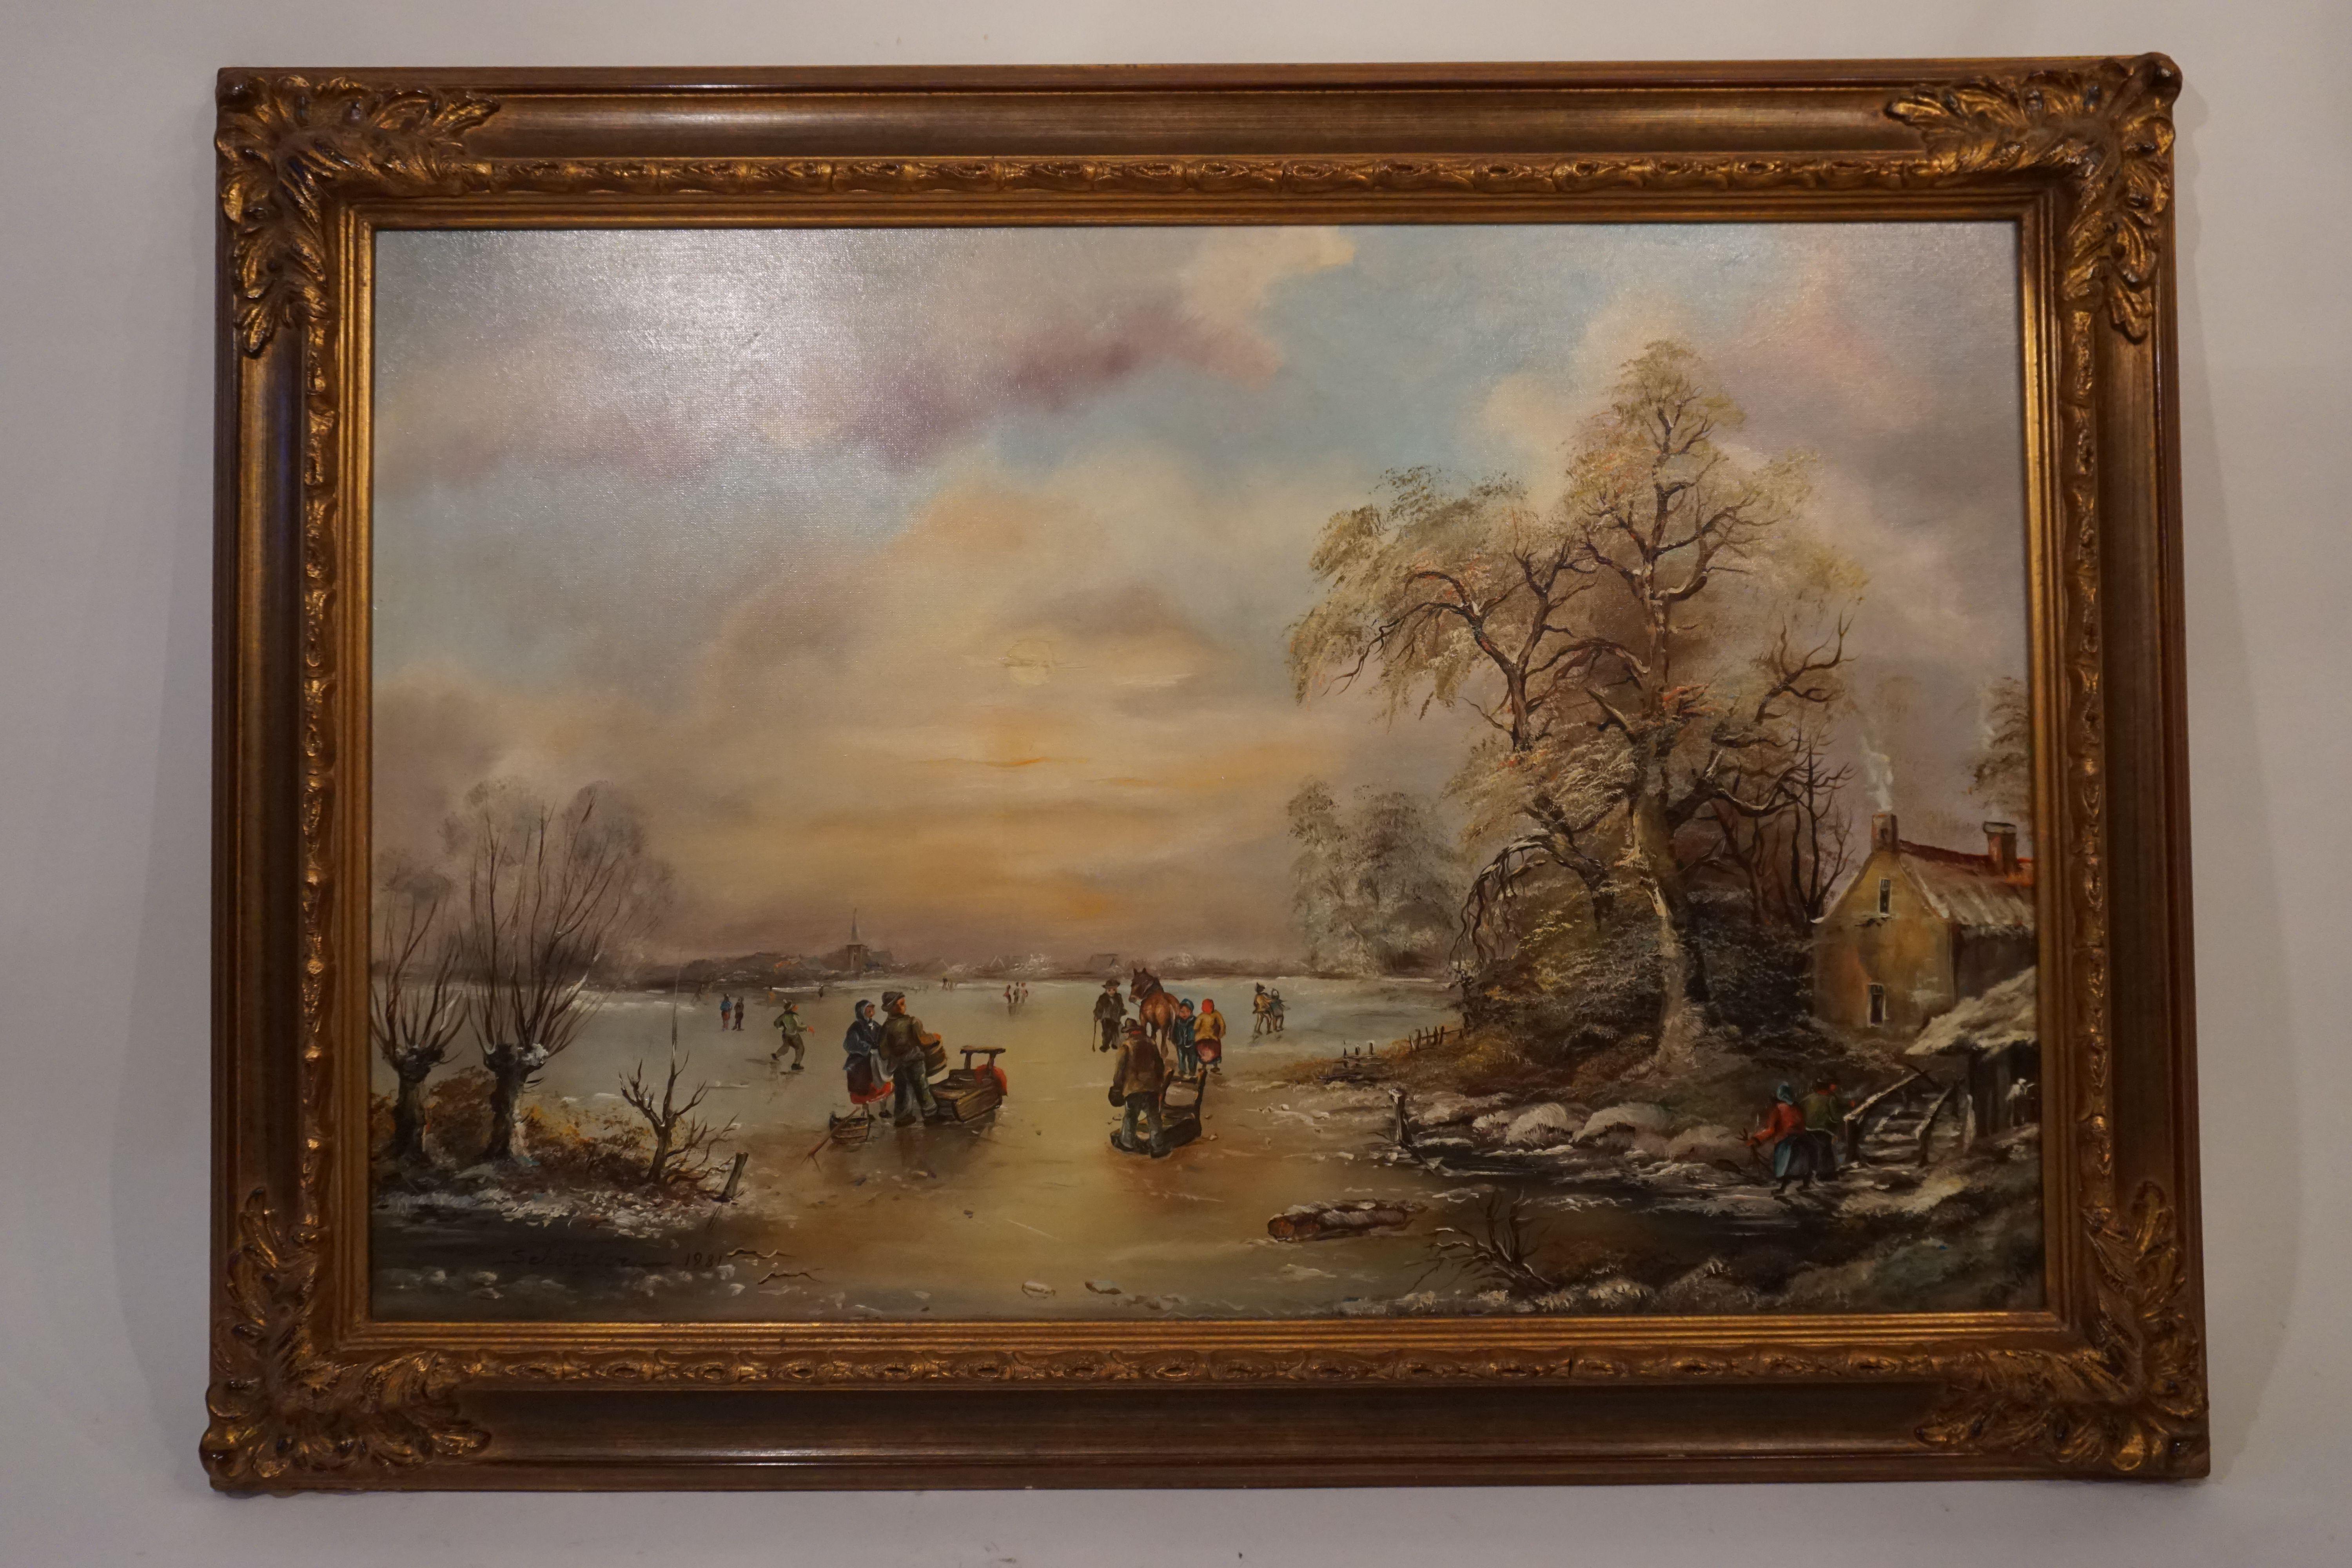 Painting winter landscape Prof. Katharina Schöttler, 1935
Painting oil on borrowed wall in precious wood frame framed in good condition.